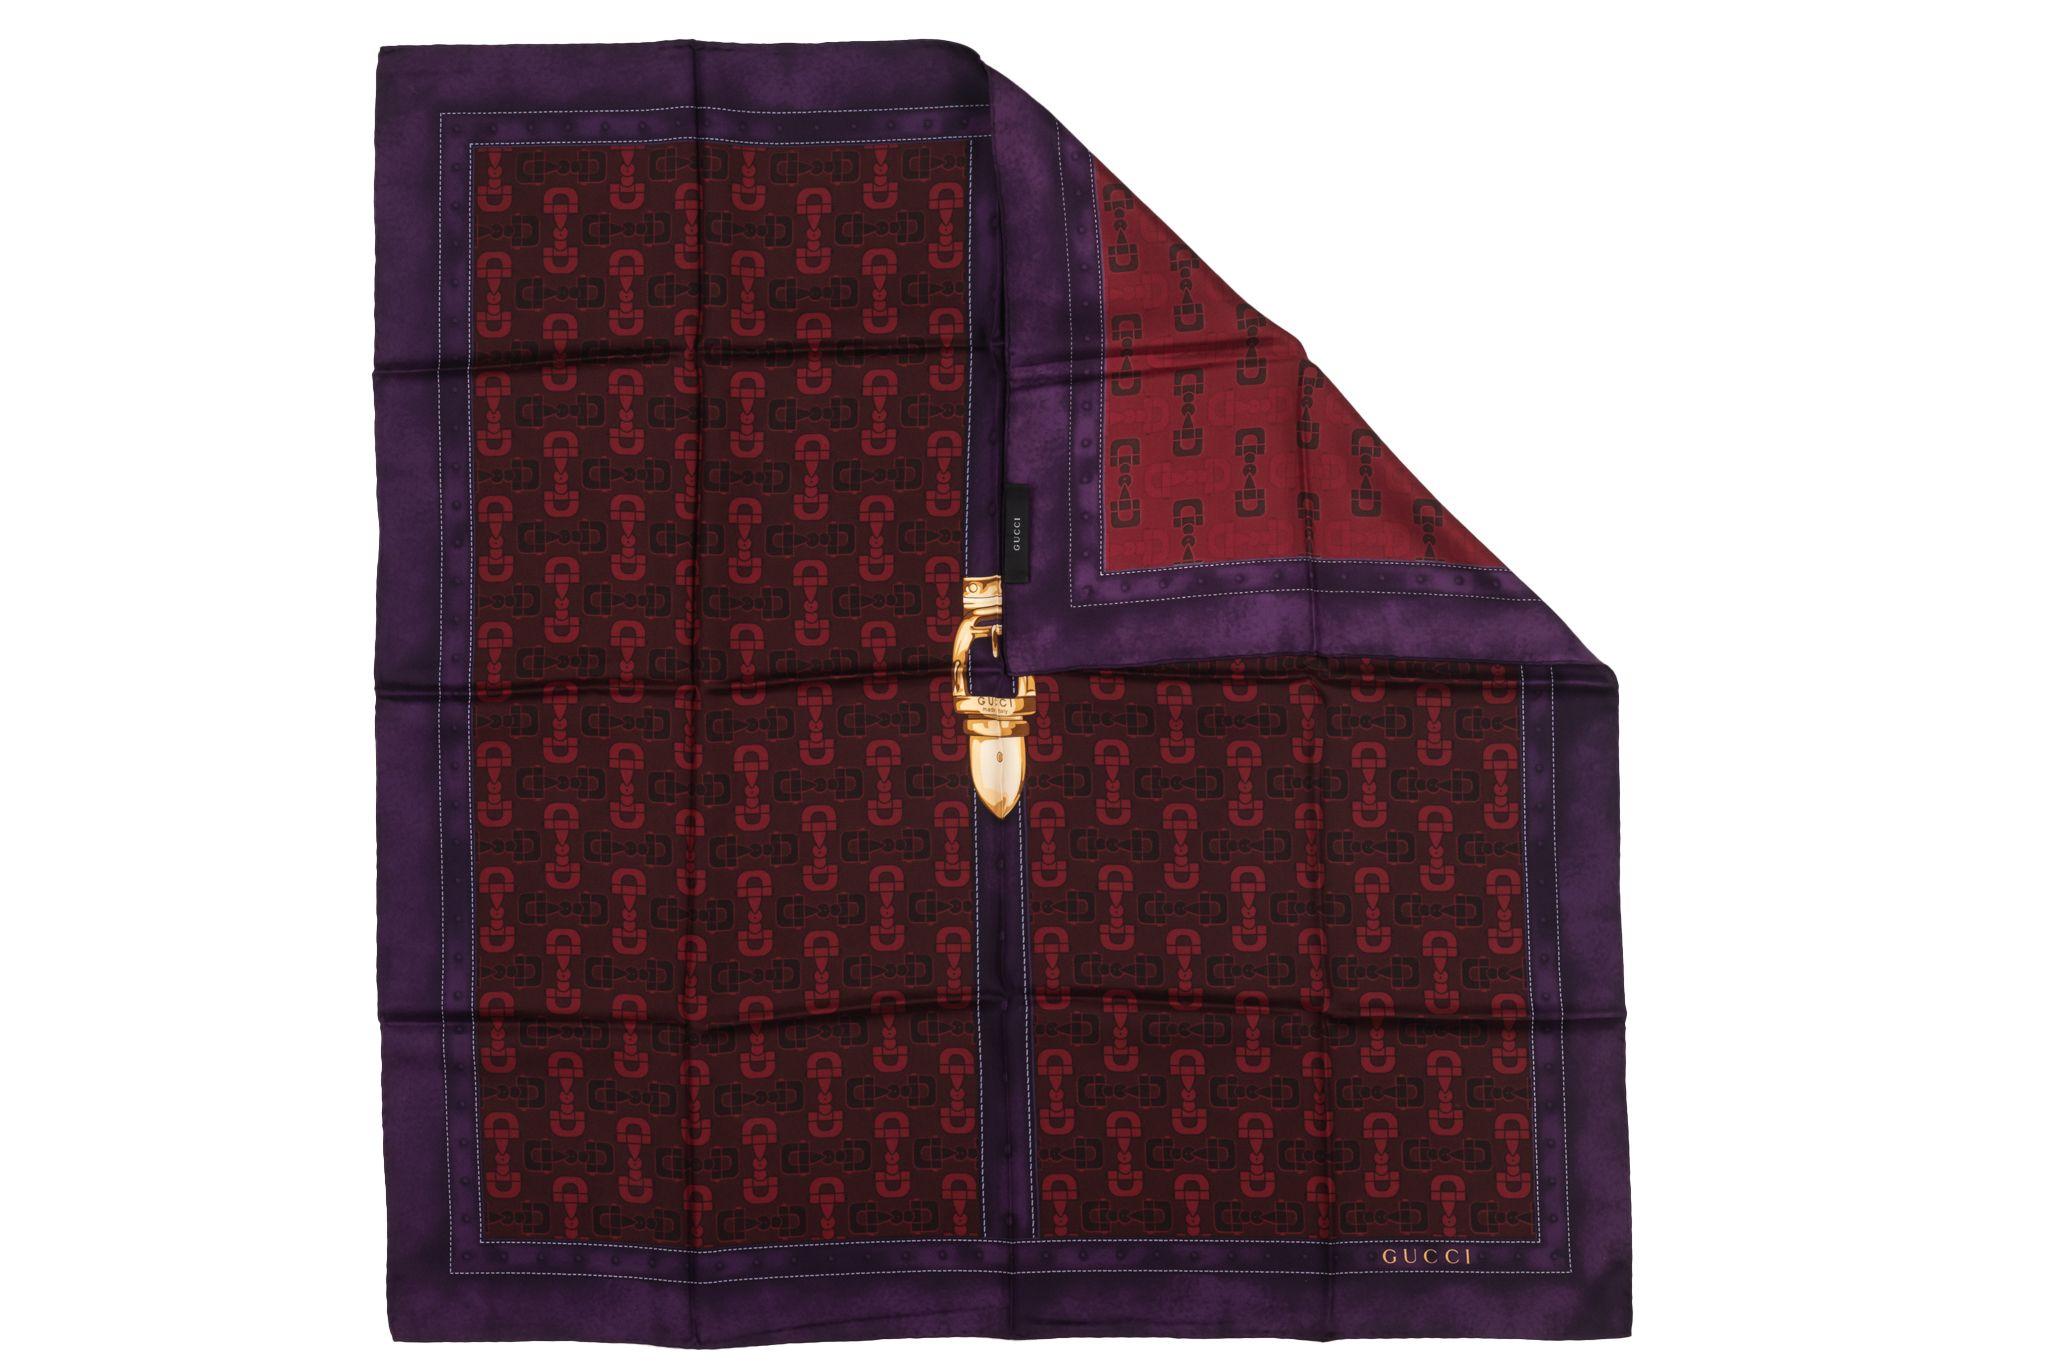 Gucci horsebit silk scarf in red and a violet frame. The pattern shows several horsebits and in the middle is a lock. The item is in excellent condition.